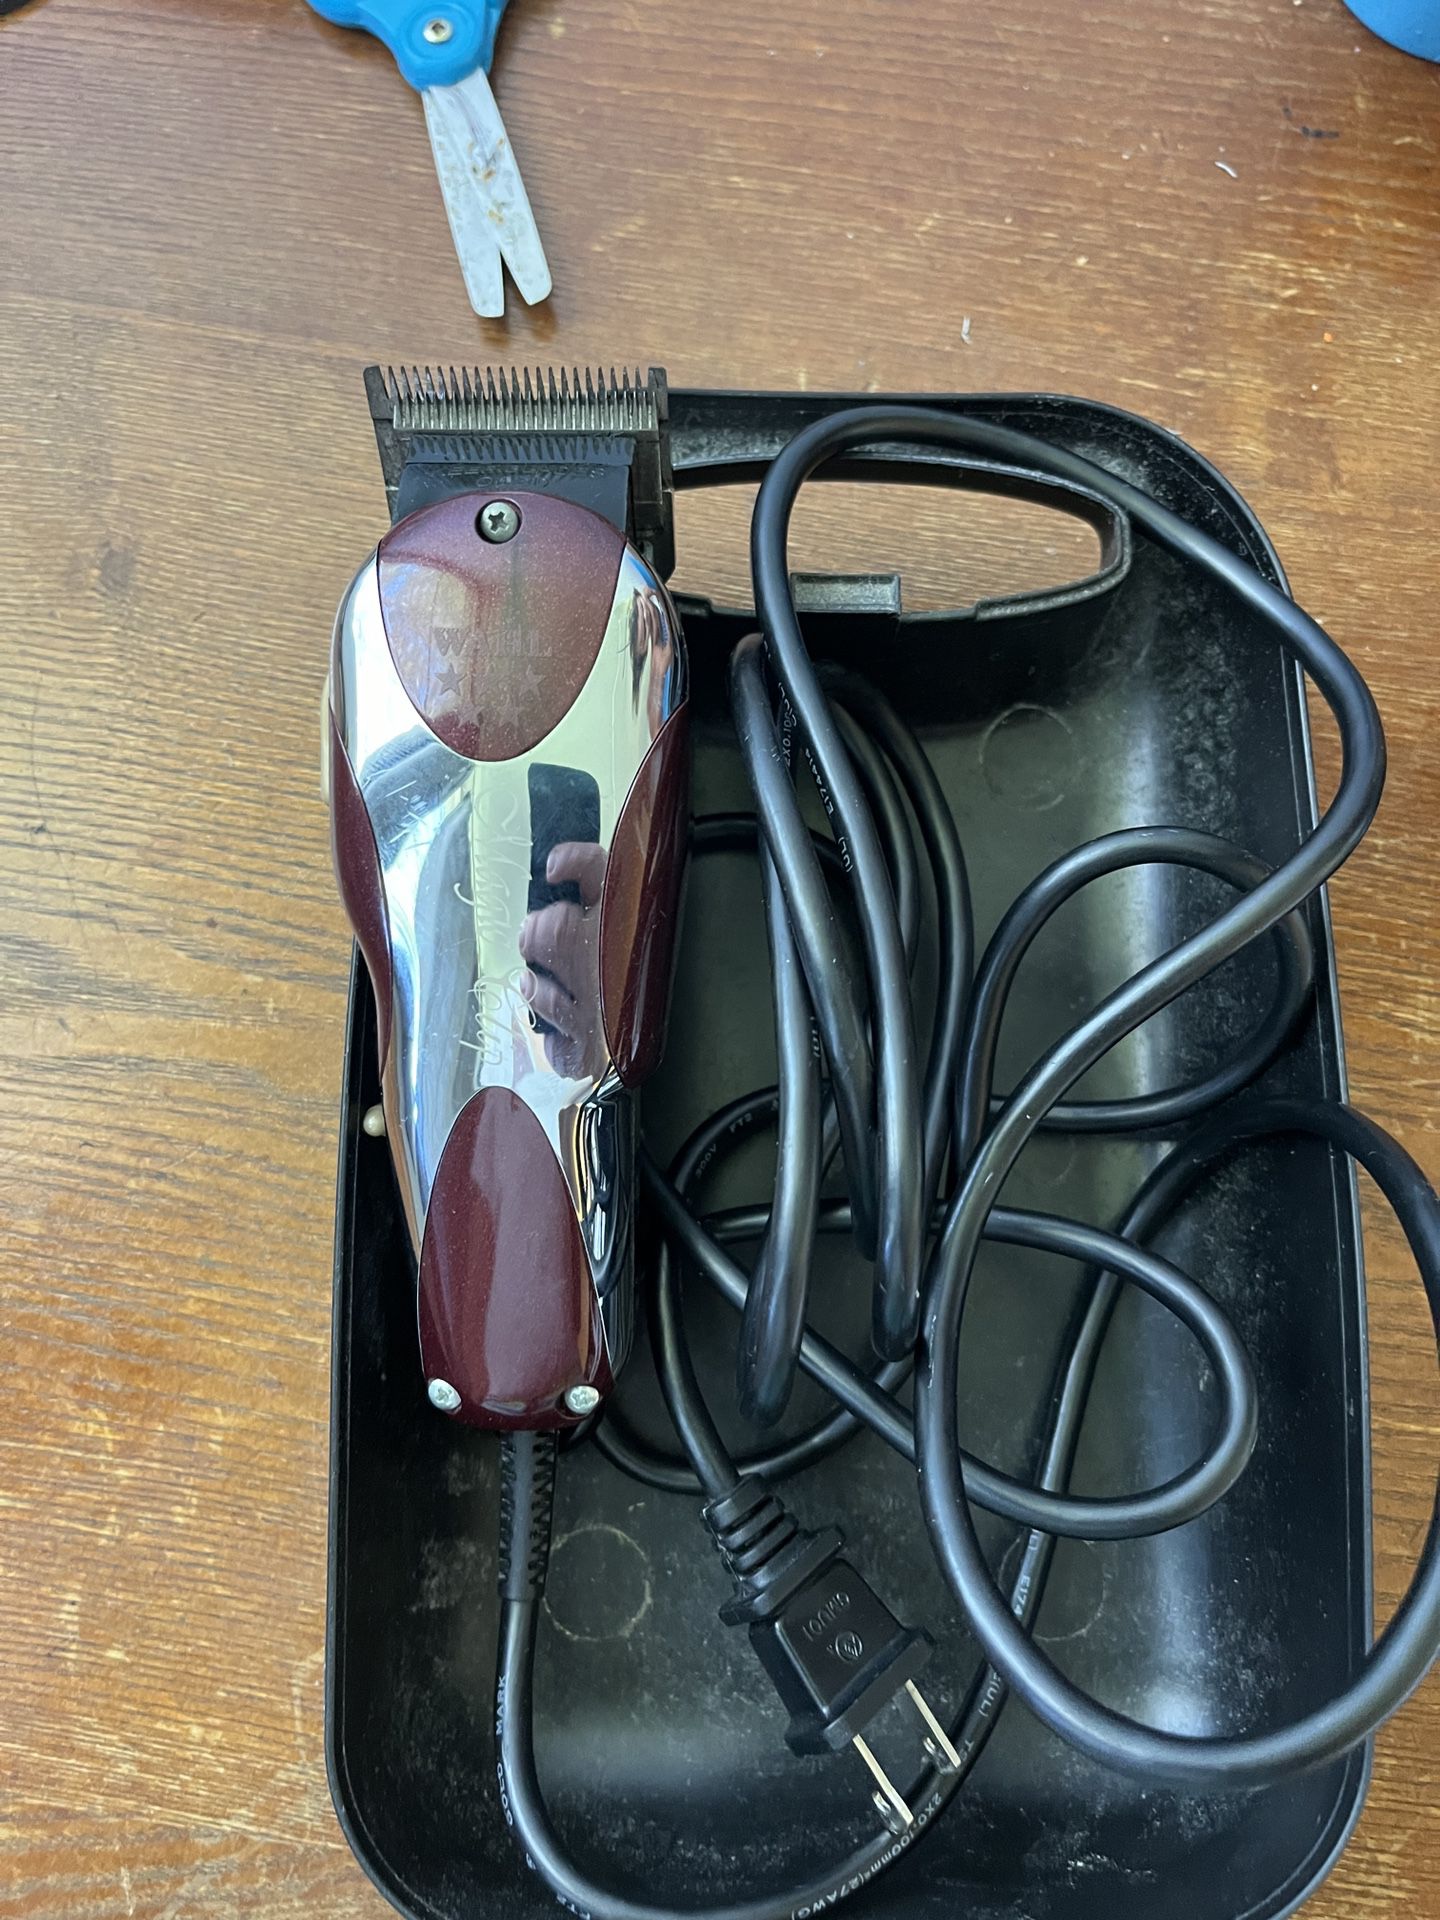 Used Corded Wahl Magic Clip w/some Guards